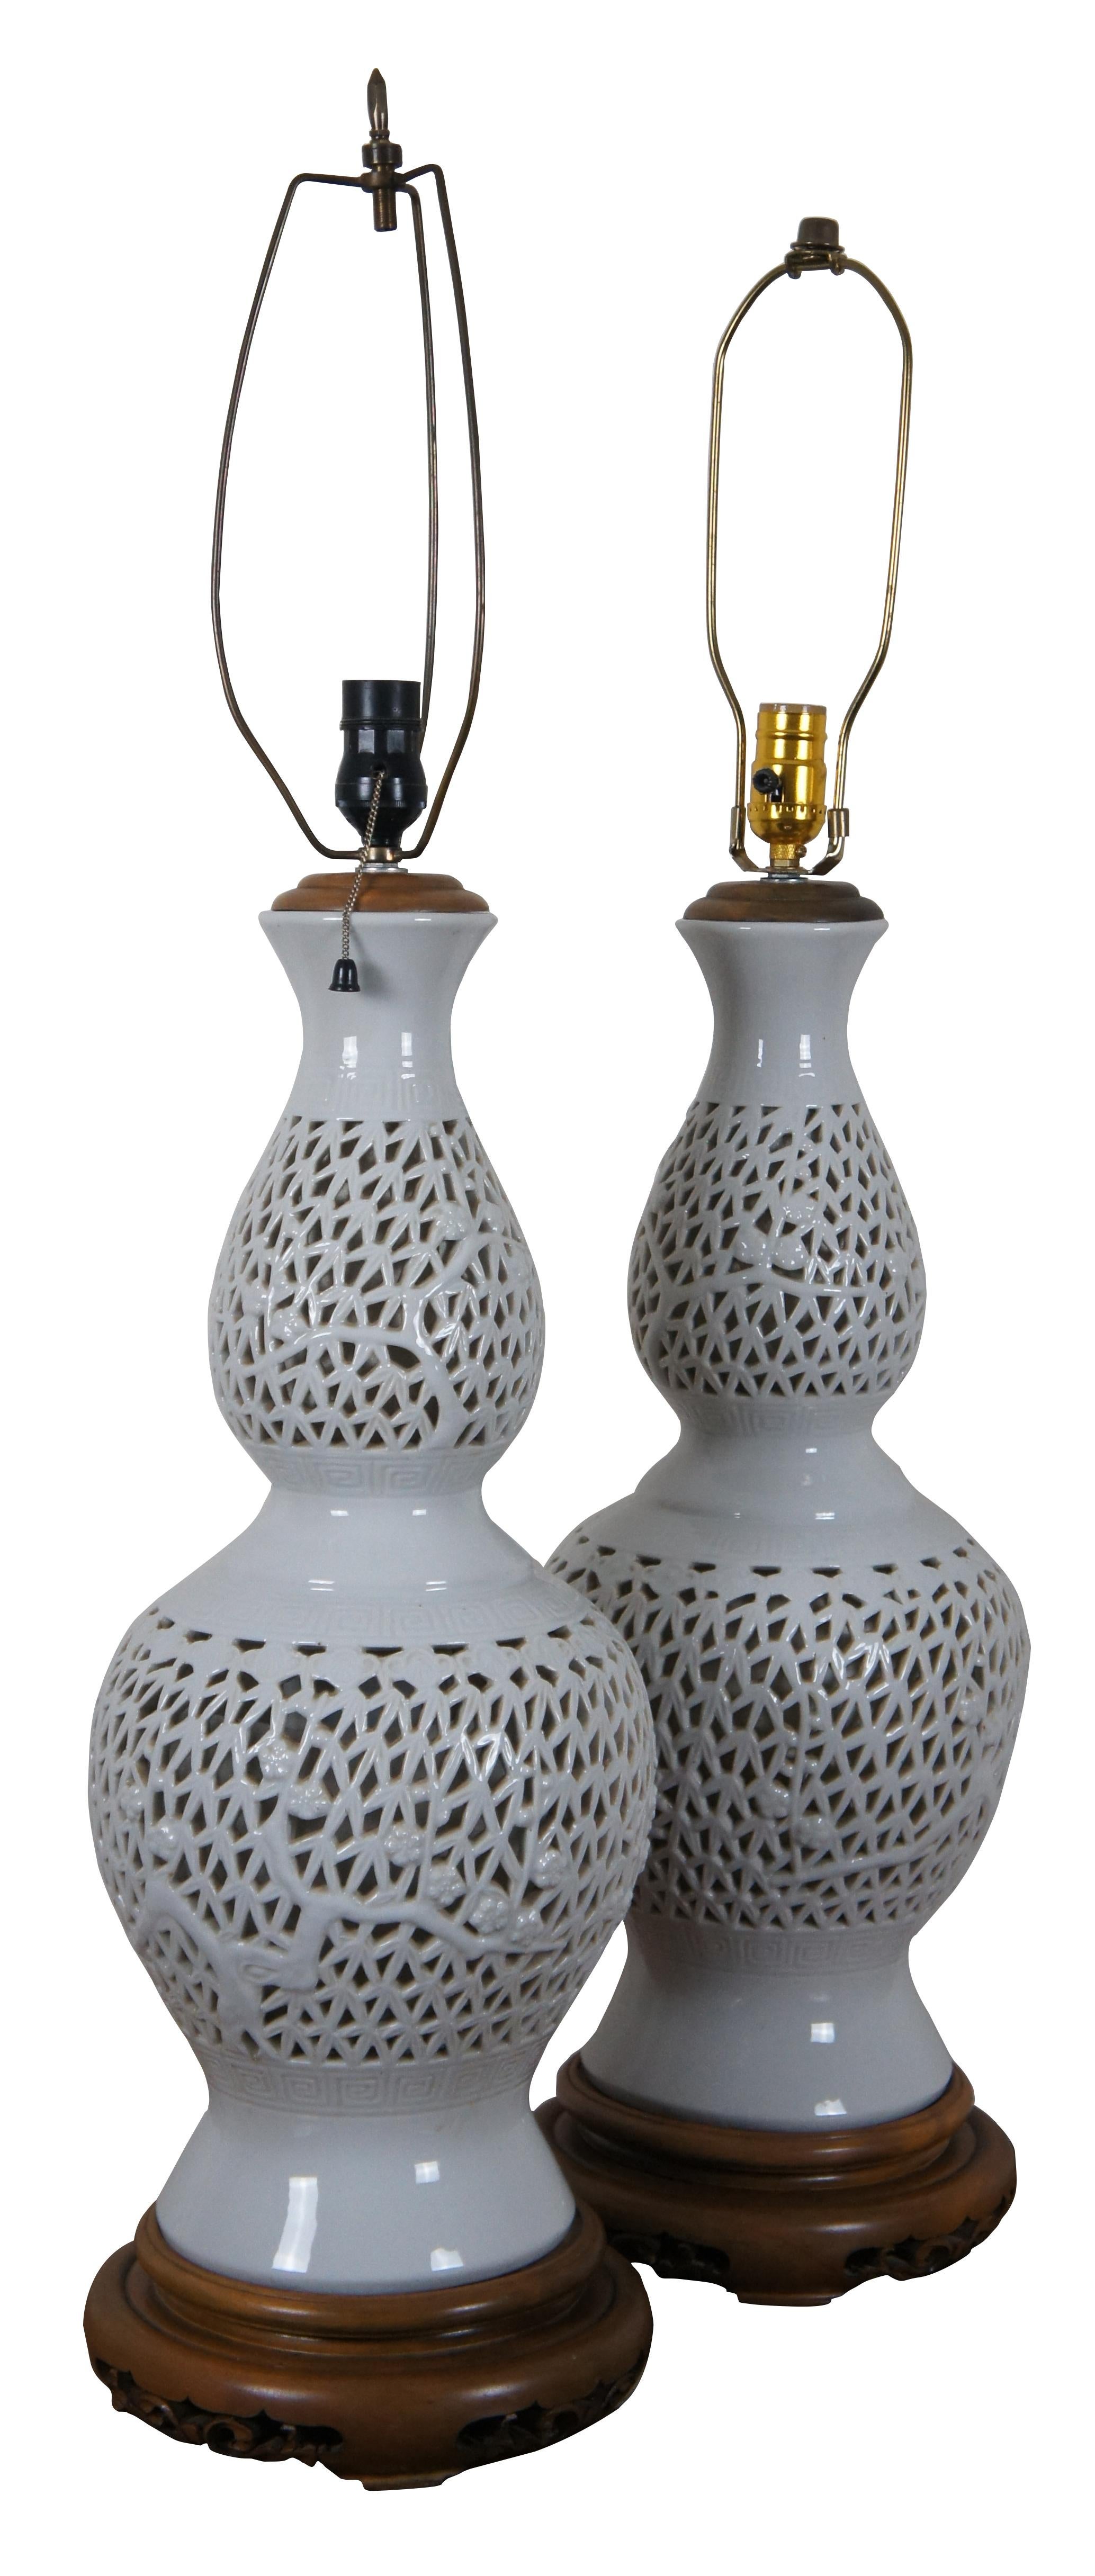 Pair of mid-century blanc de chine reticulated porcelain table lamps with wood base and cap, featuring a gourd shaped form pierced with a design of bamboo stalks and leaves.

Measures: 9.5” x 28” / approx total height – 37” (diameter x height).